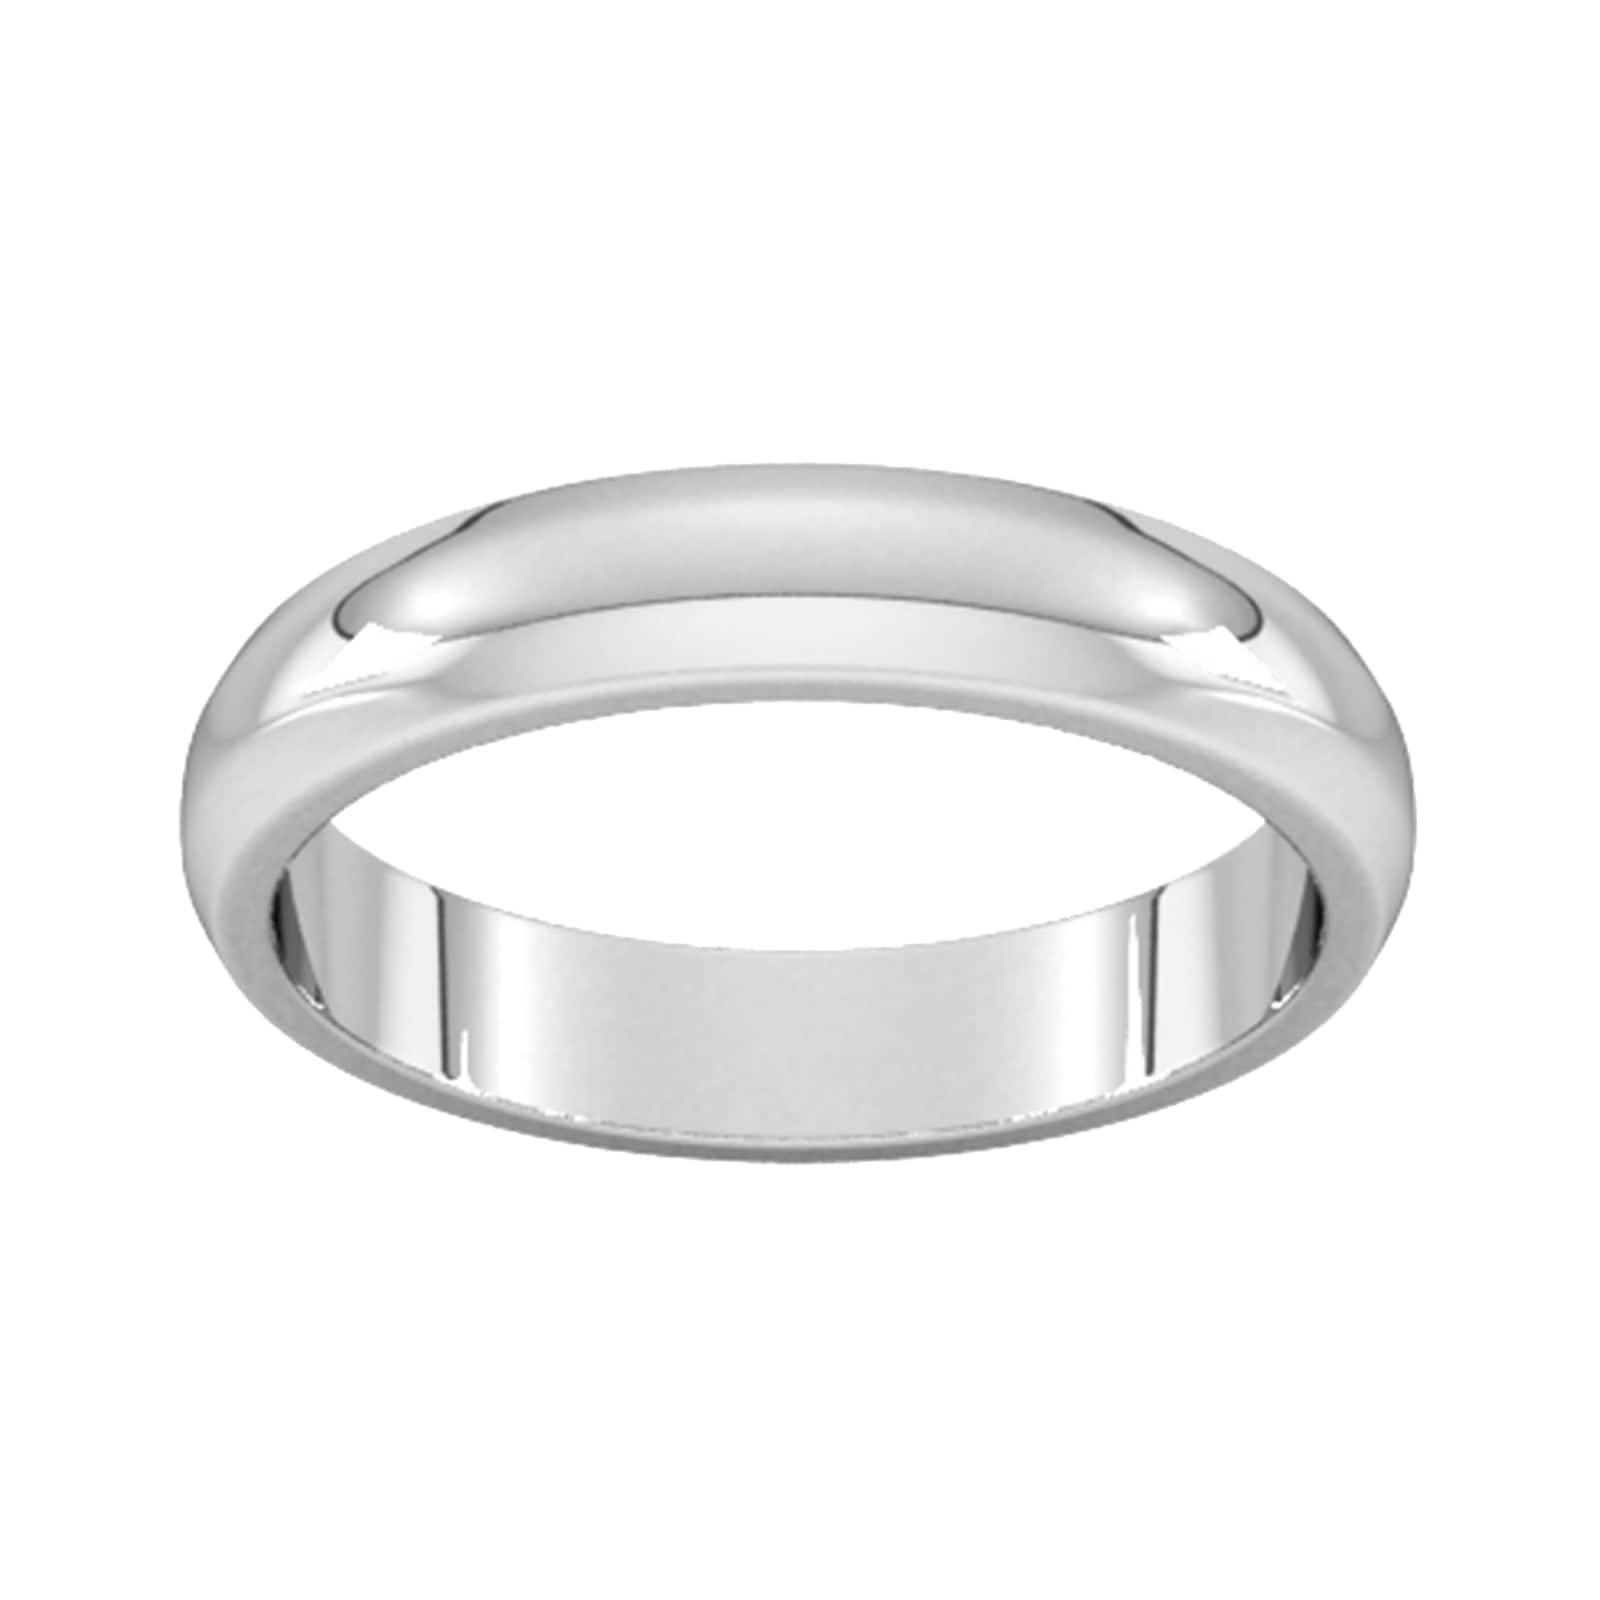 4mm D Shape Heavy Wedding Ring In 9 Carat White Gold - Ring Size R